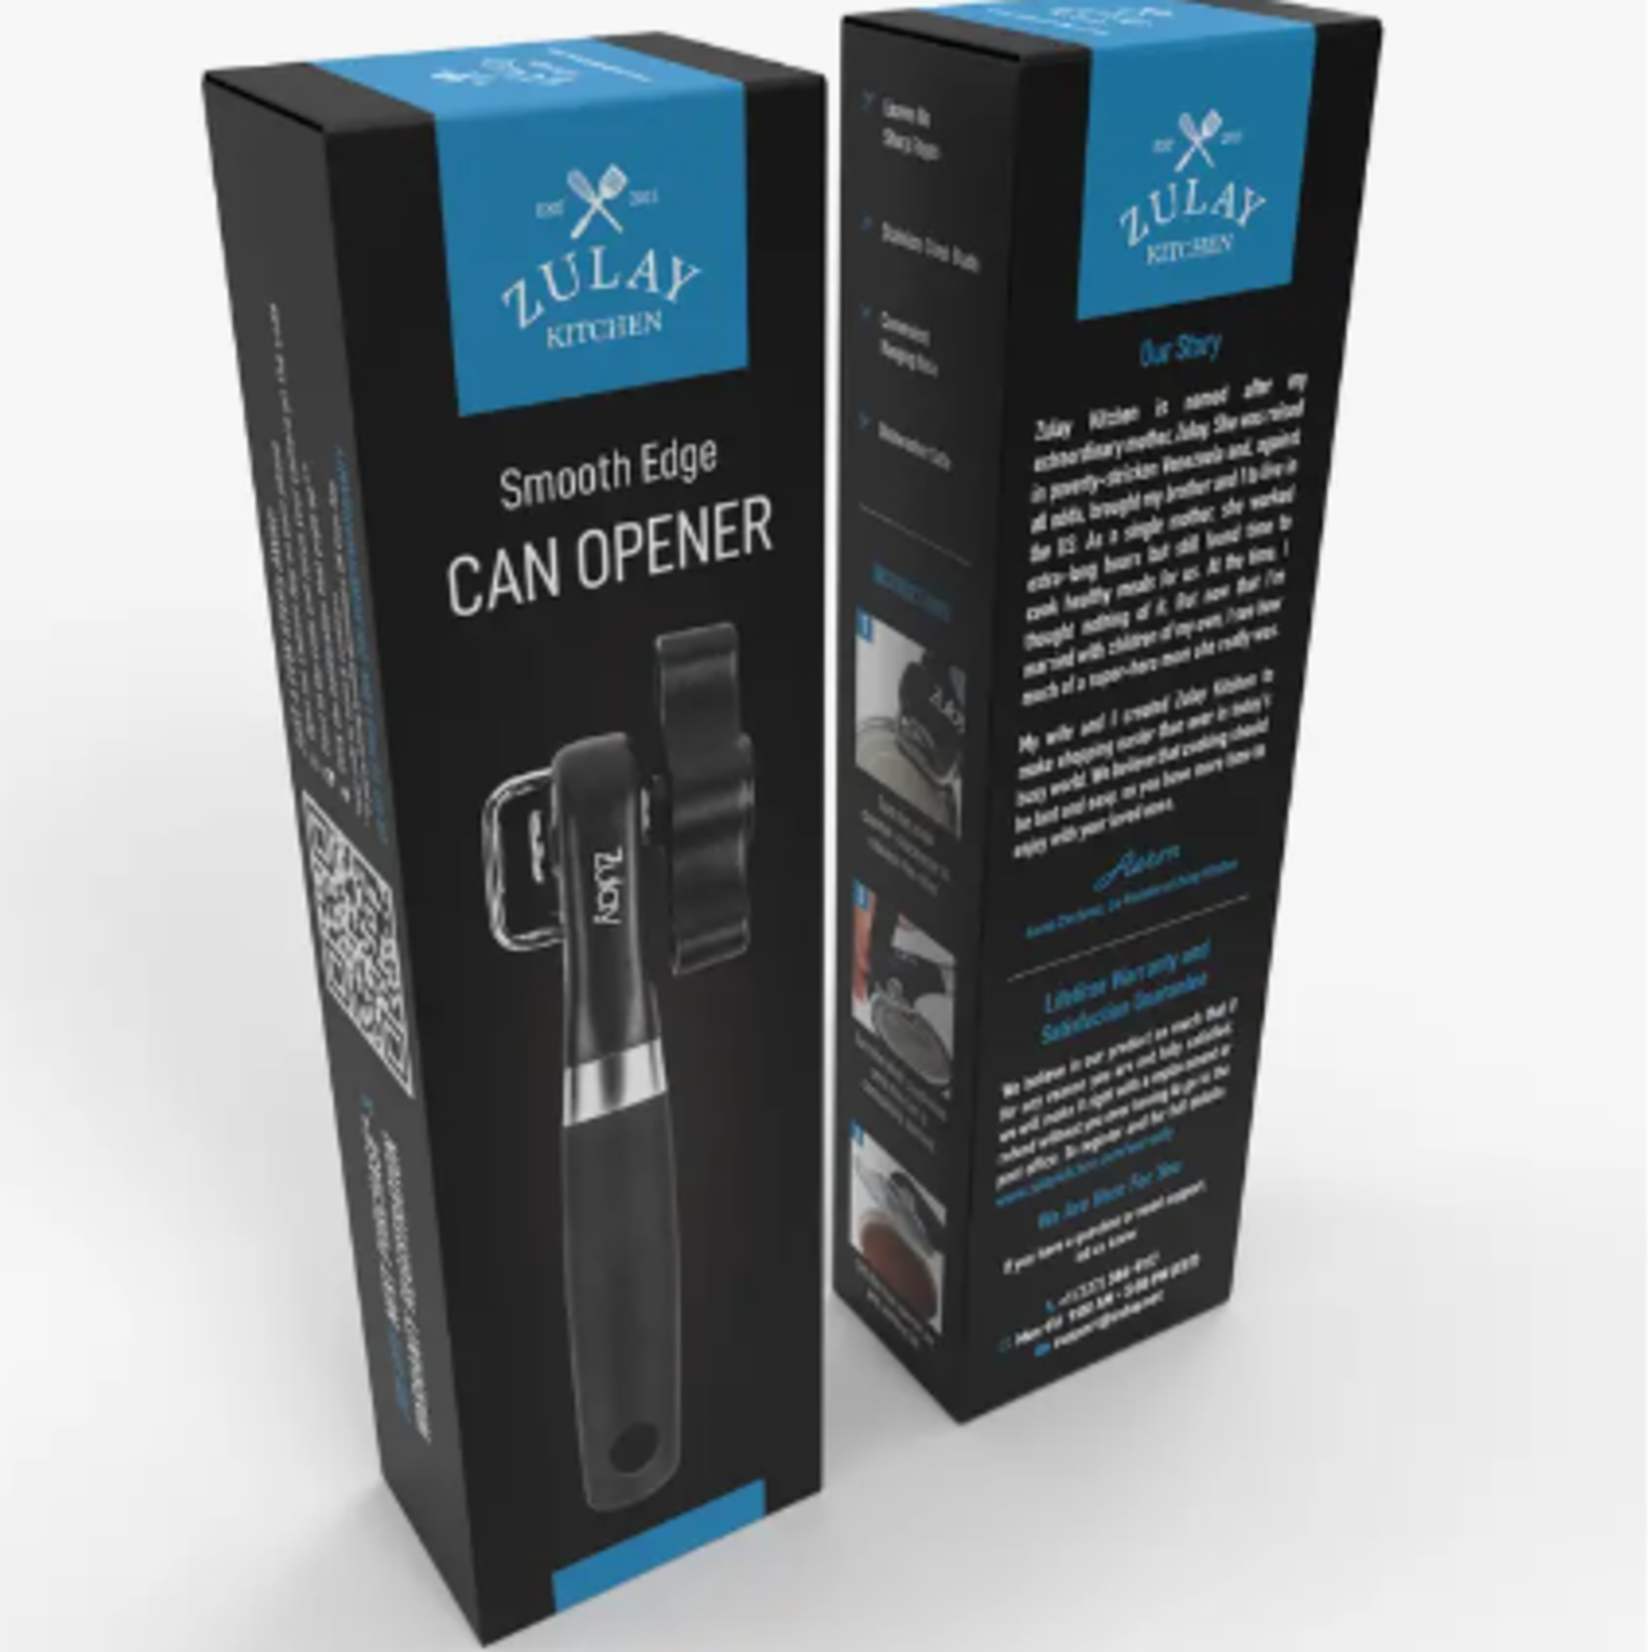 Zulay Kitchen Smooth Edge Can Opener - No sharp Edges/Cuts